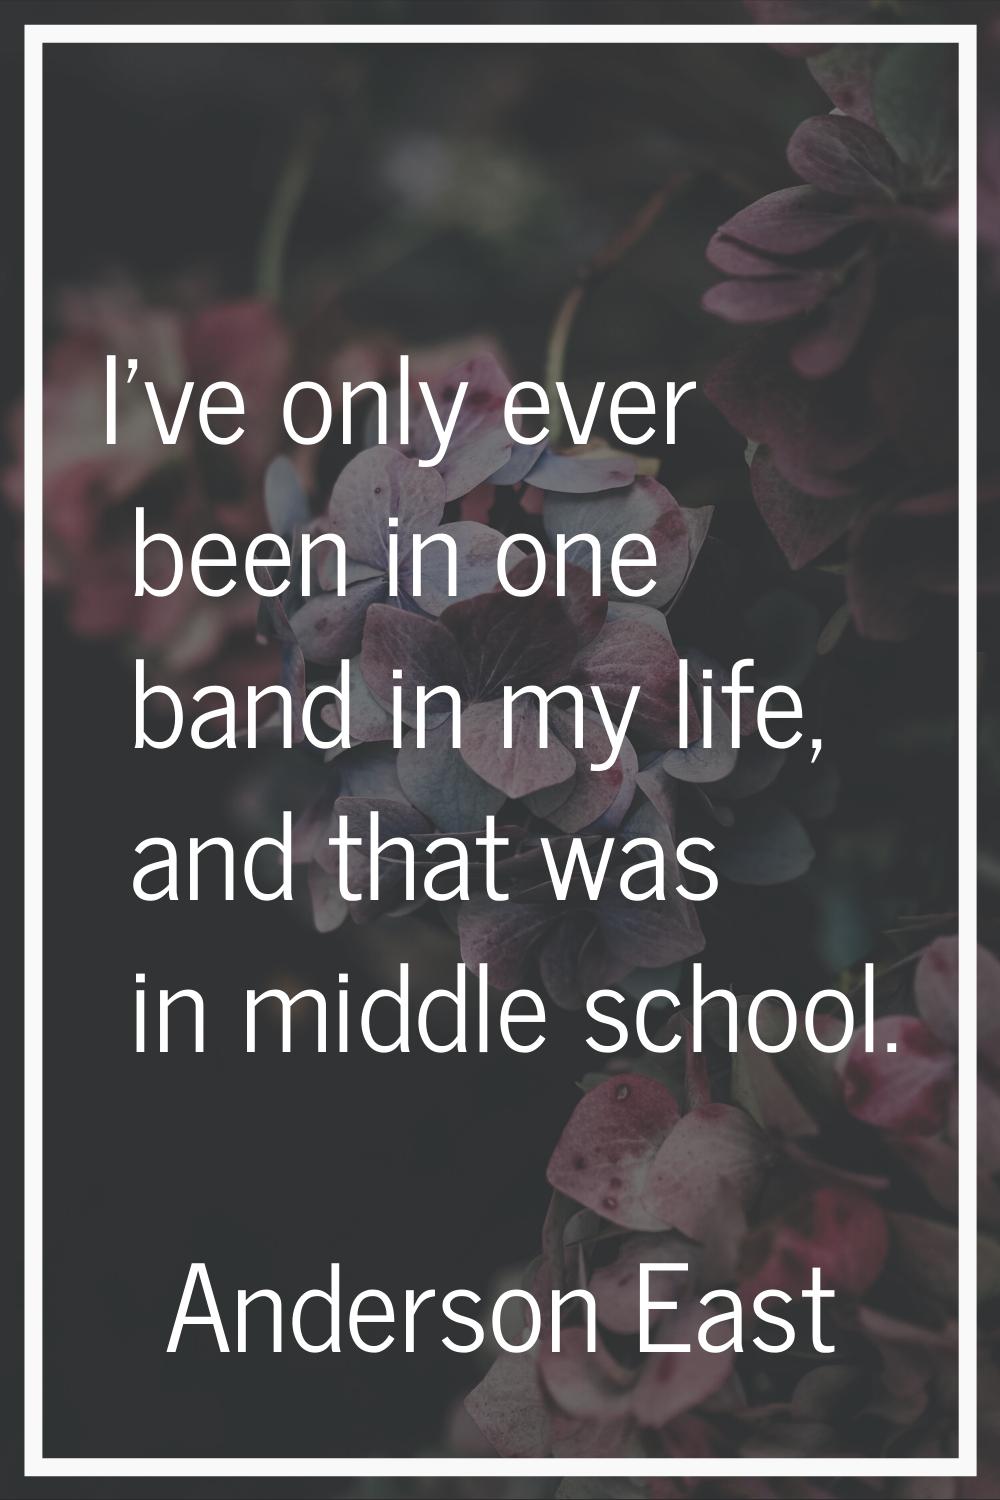 I've only ever been in one band in my life, and that was in middle school.